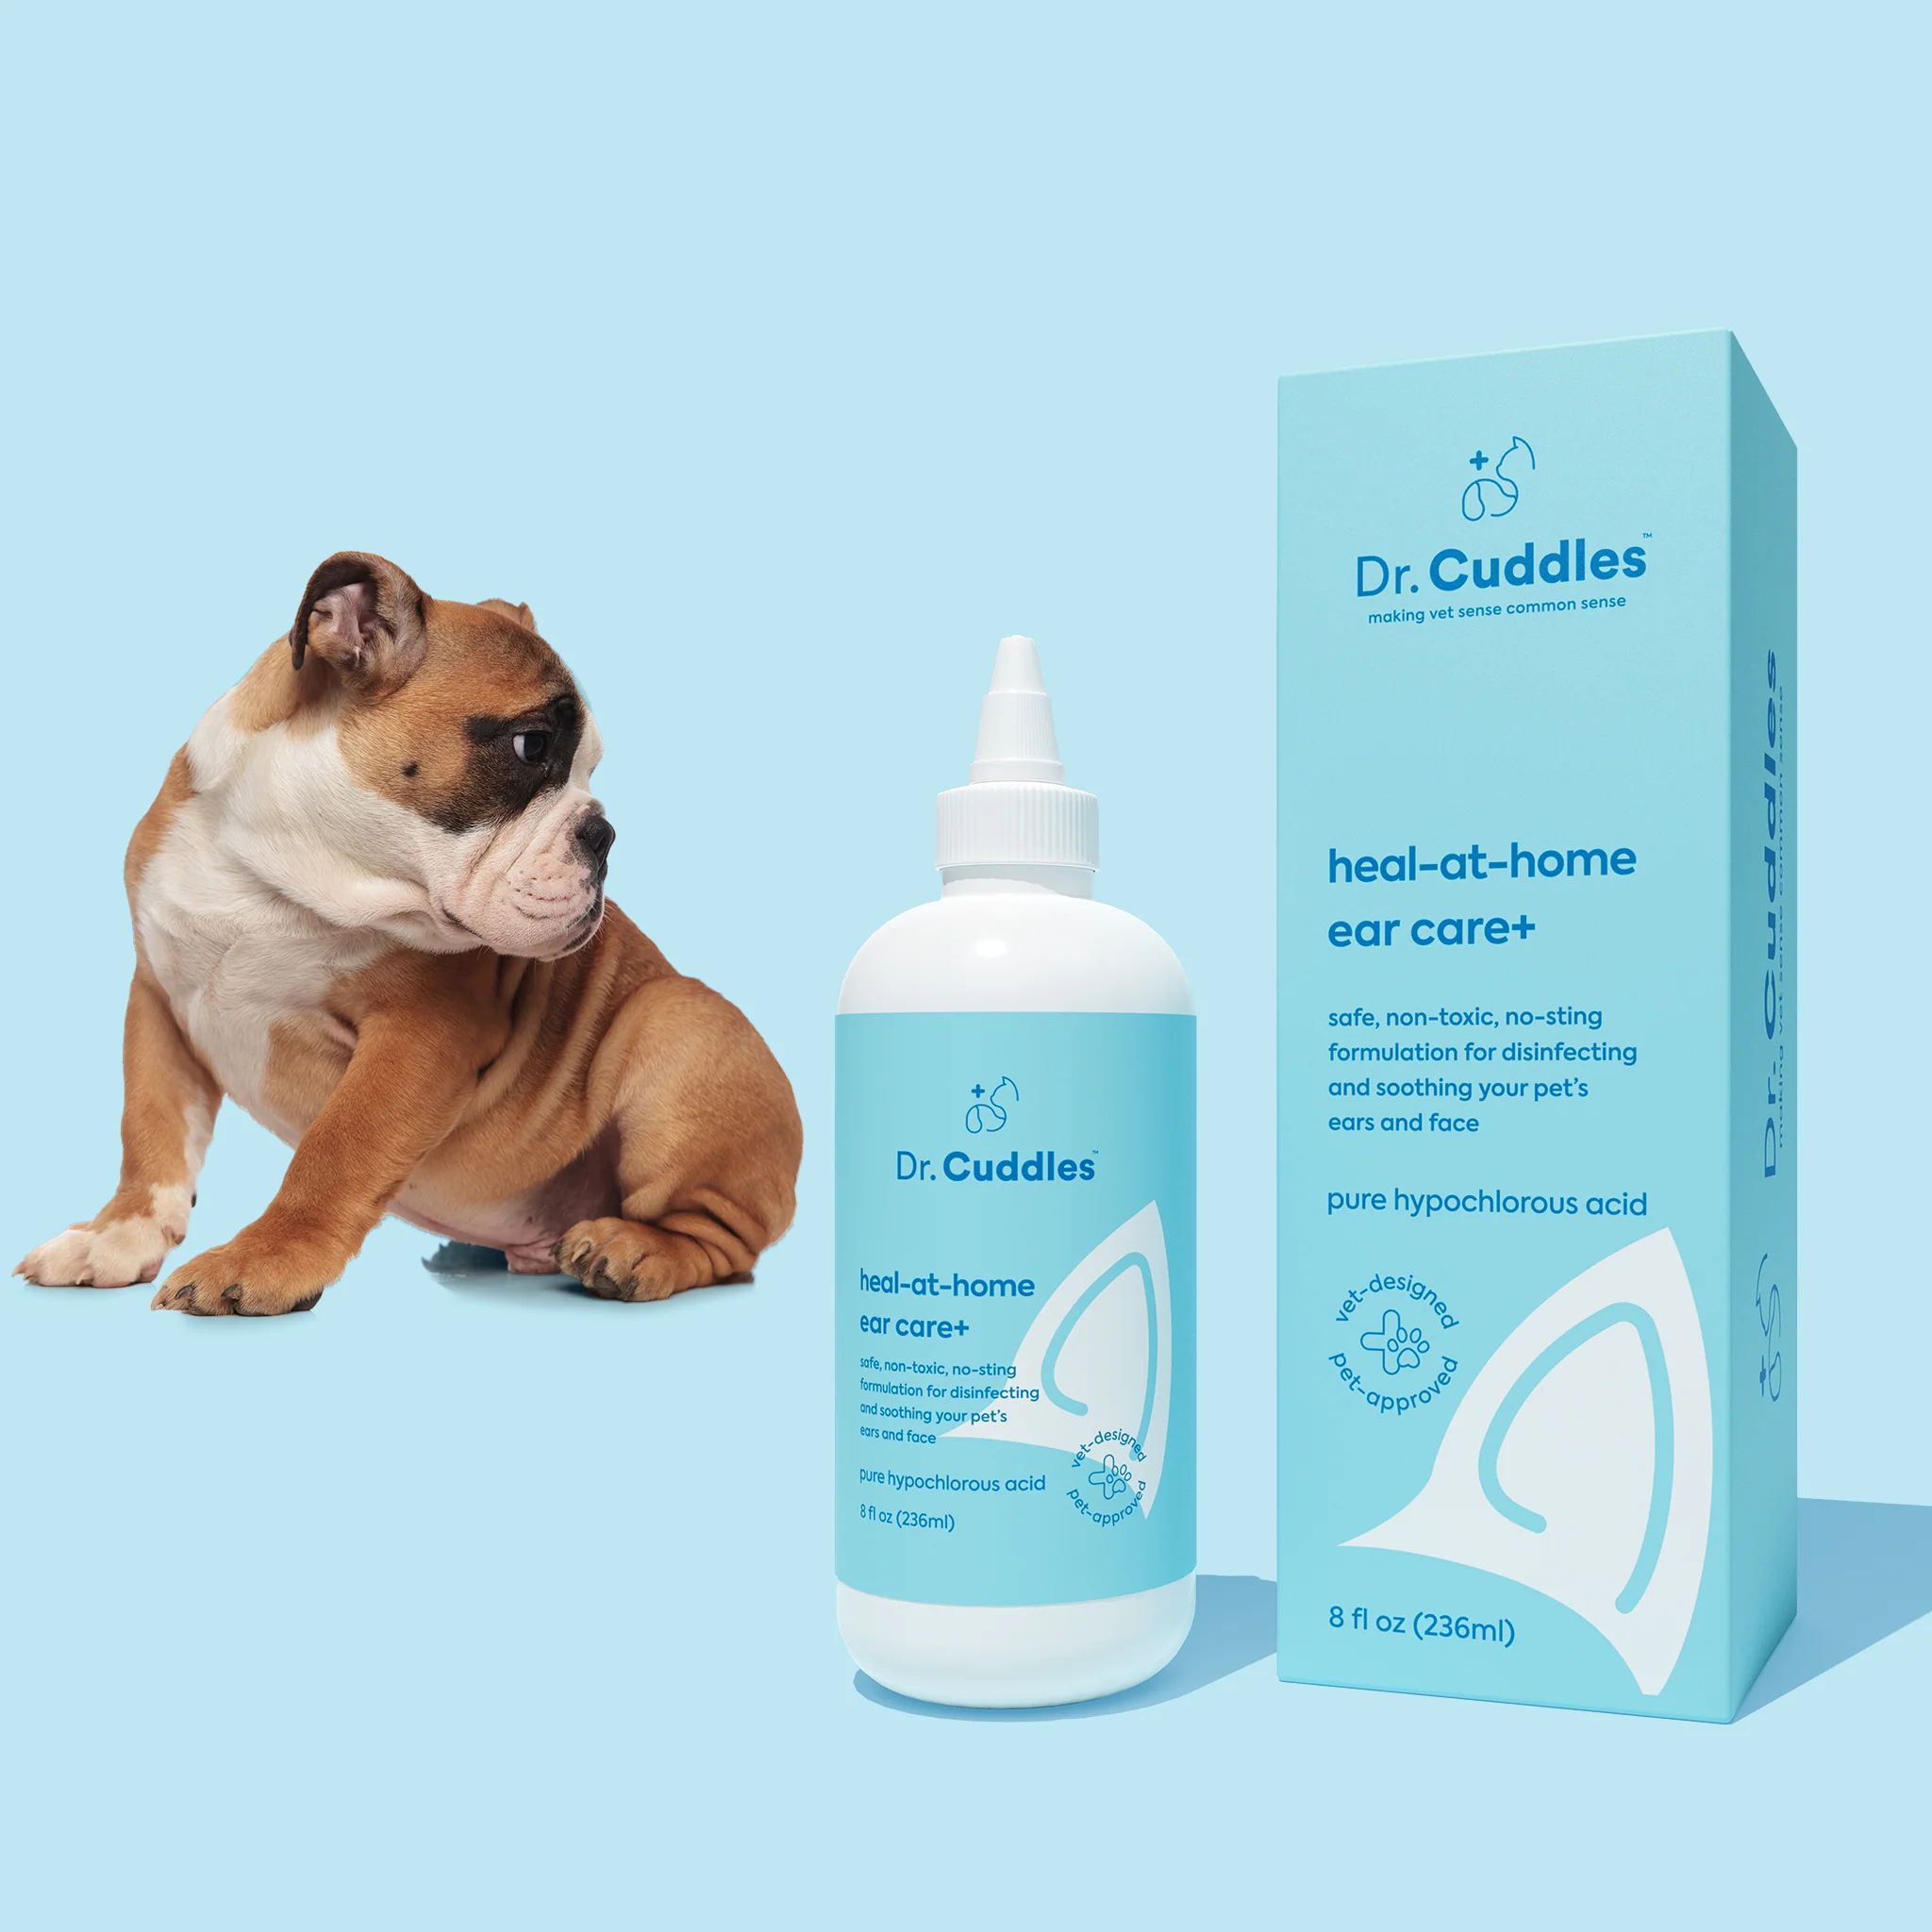 Heal-at-home ear care+ | Dr Cuddles (US)